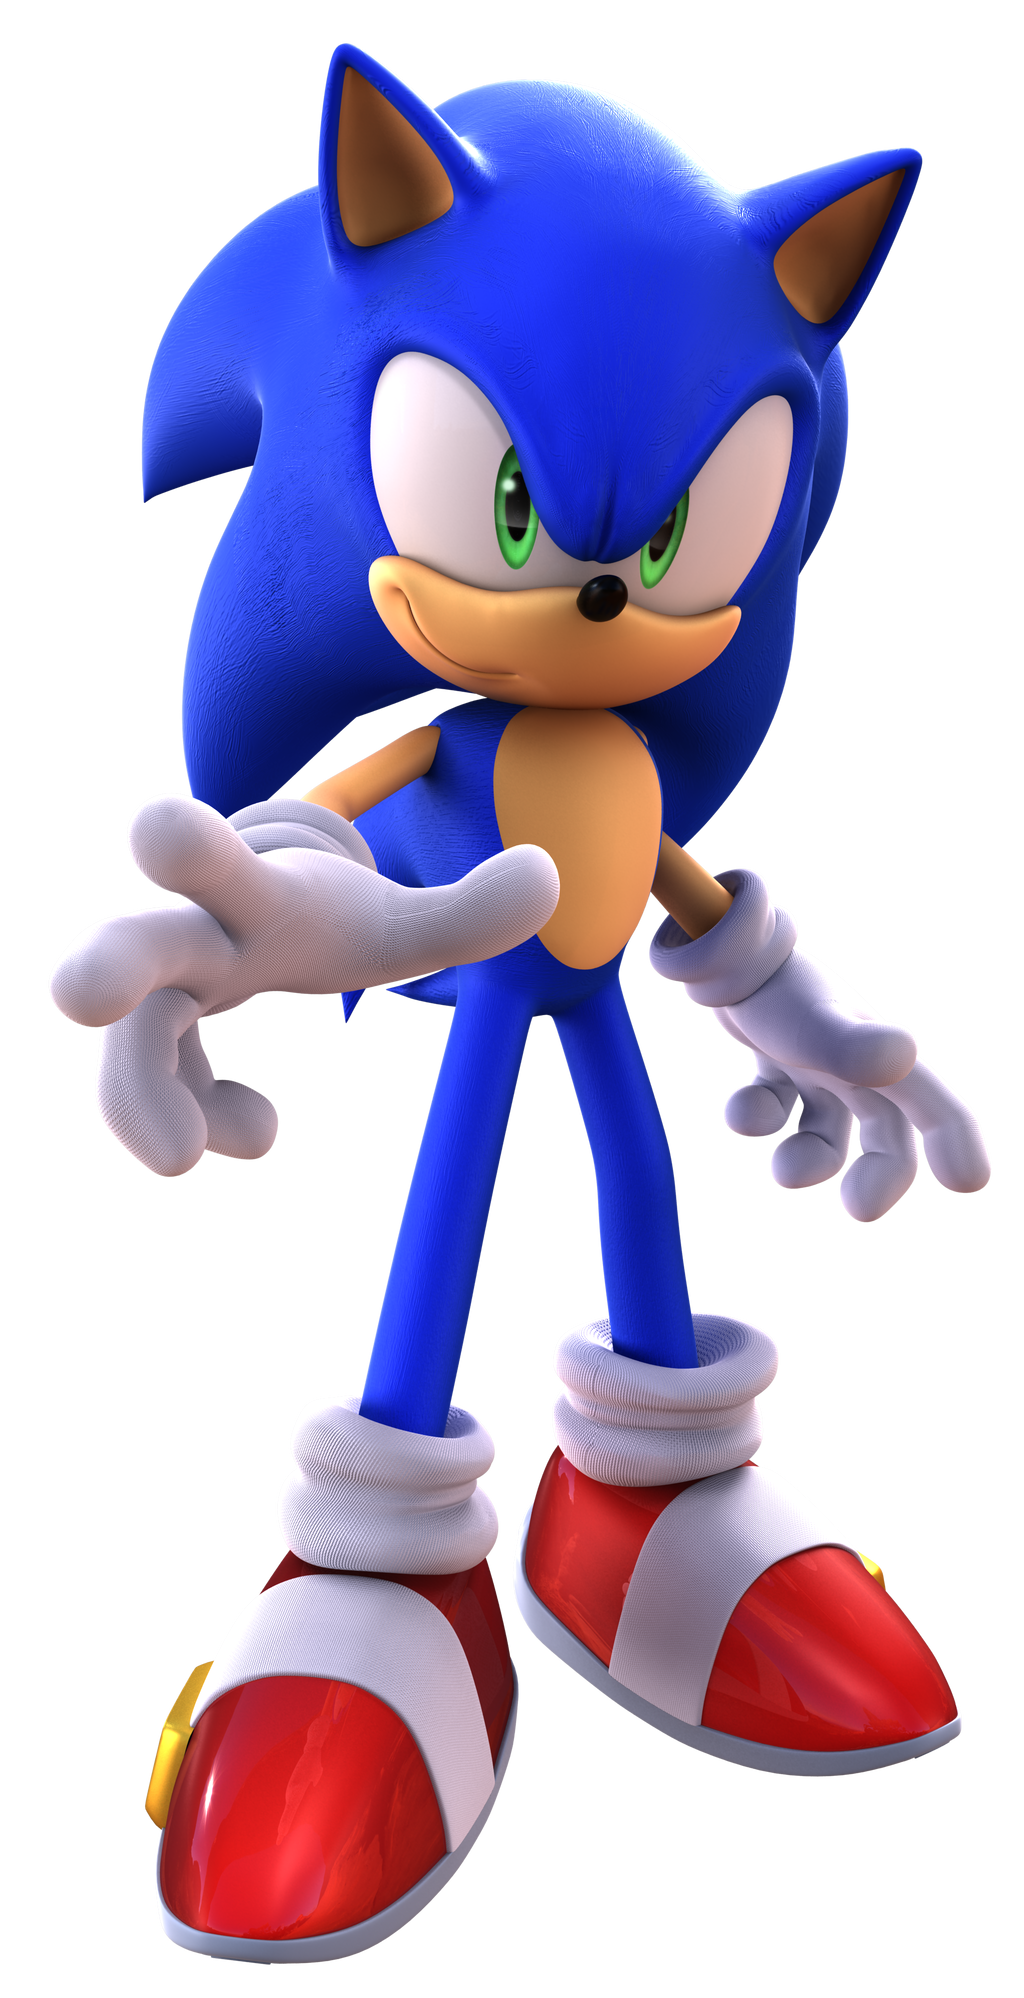 SONIC THE HEDGEHOG (2006) - Sonic the Hedgehog - Gallery - Sonic SCANF